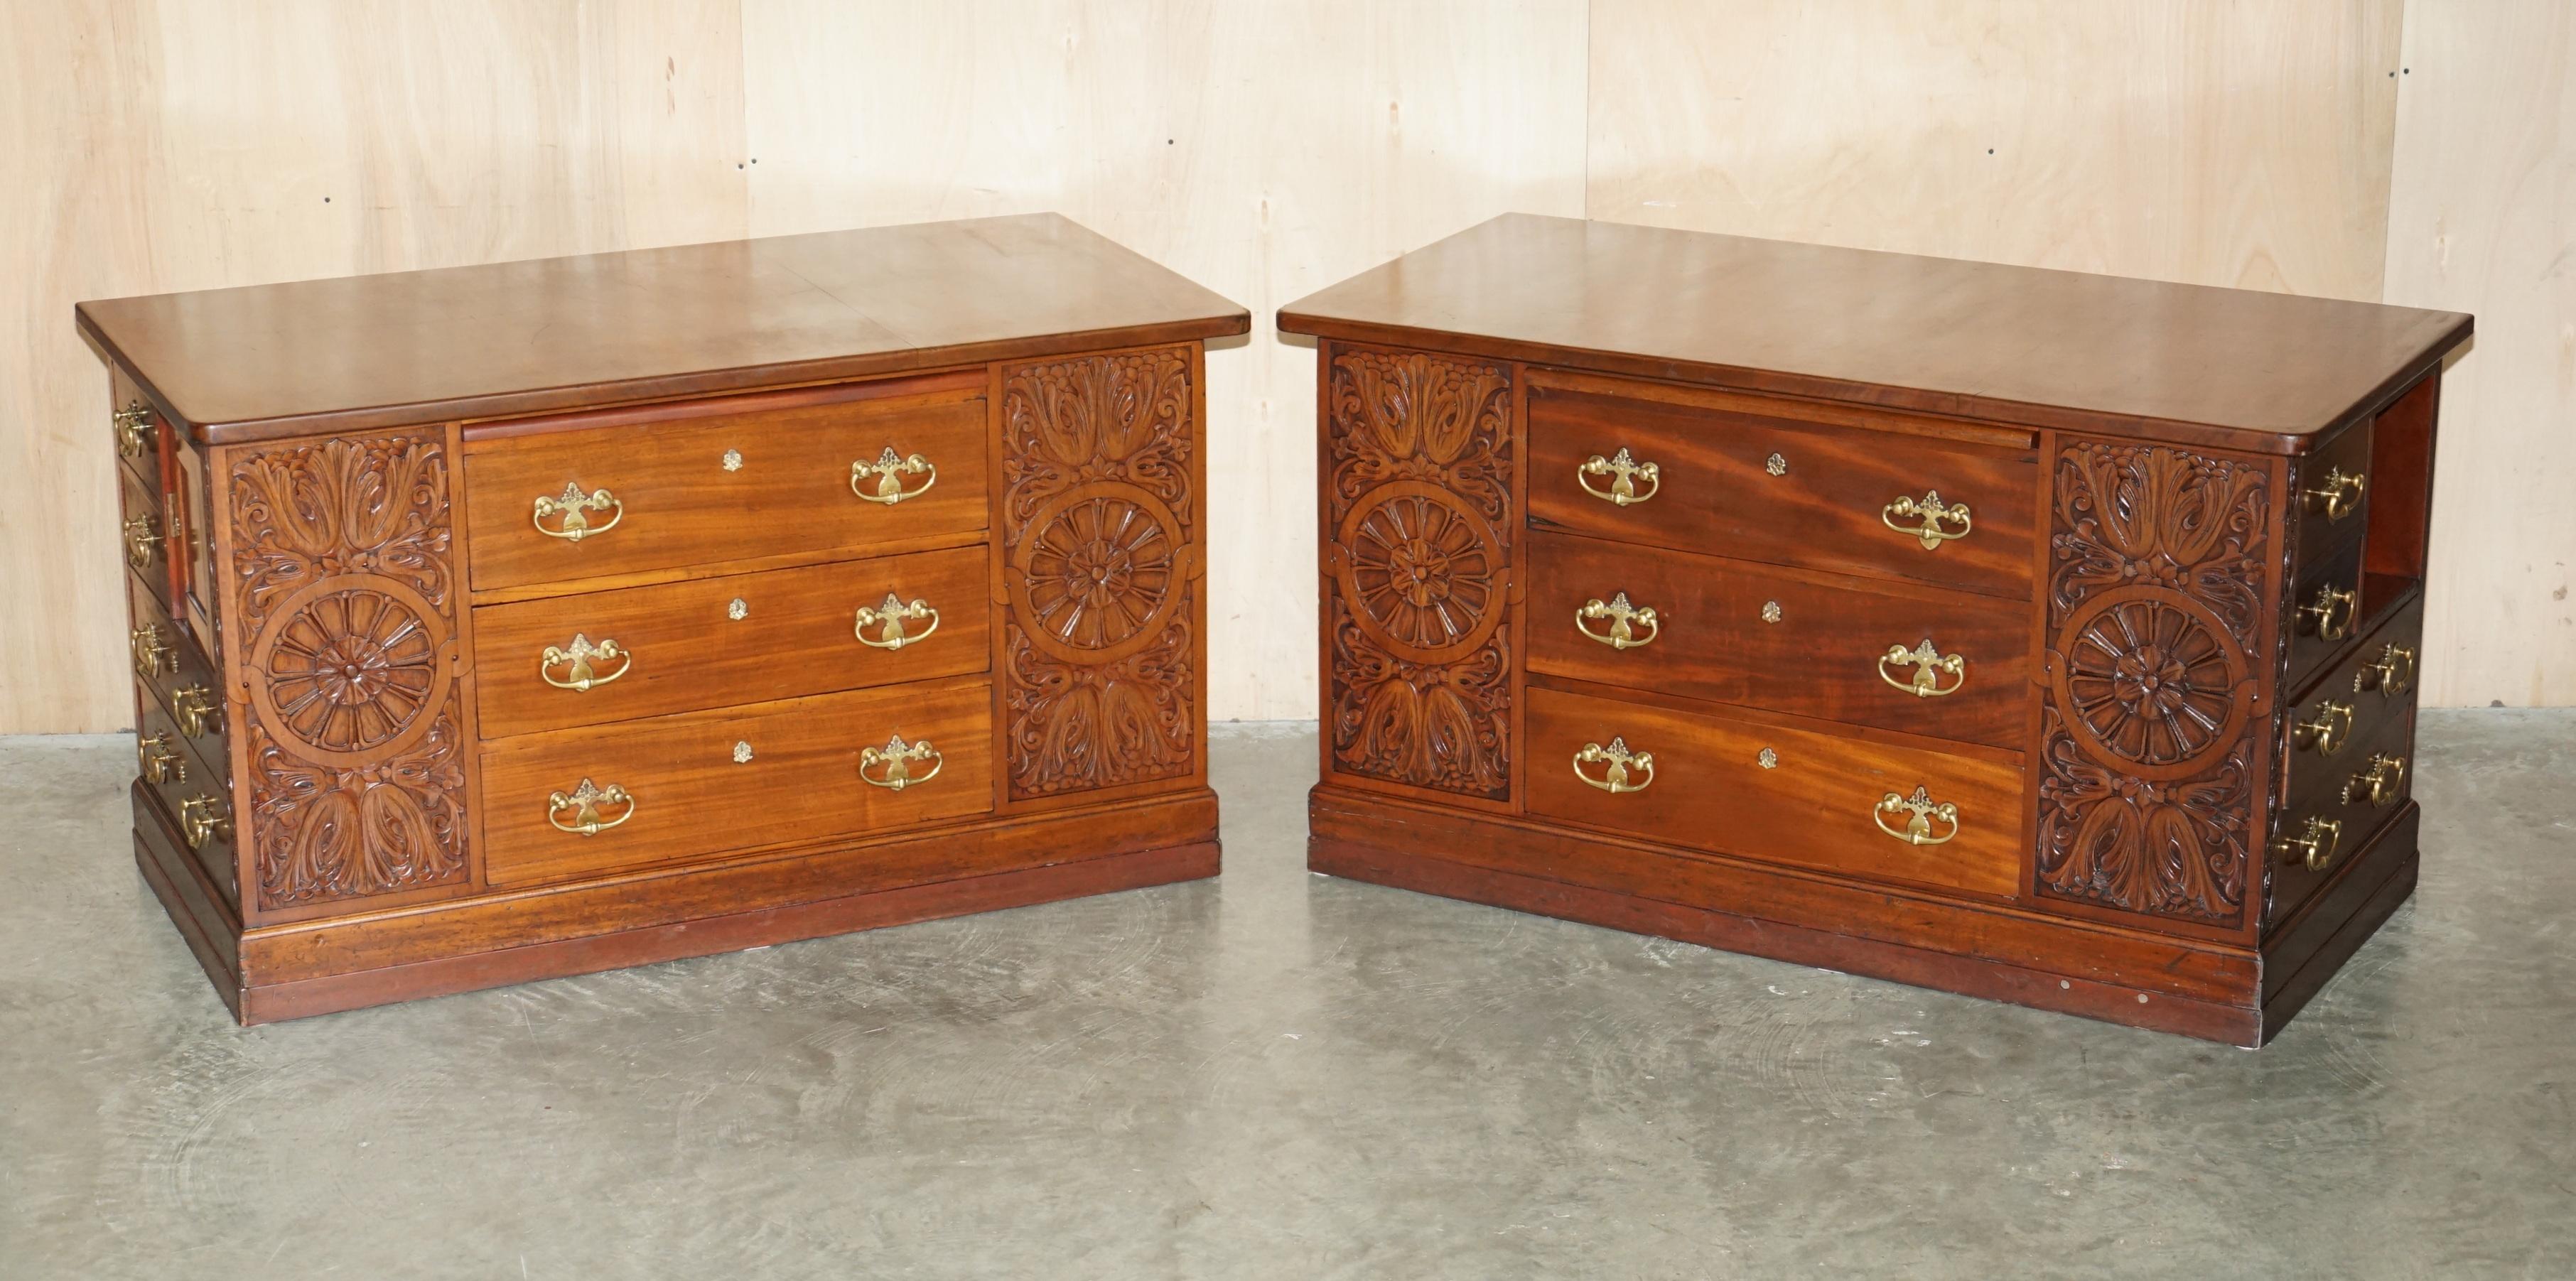 HUGE ANTIQUE VICTORIAN THOMAS CHIPPENDALE ESTATE DESK OR TWO SIDEBOARD DRAWERs For Sale 6